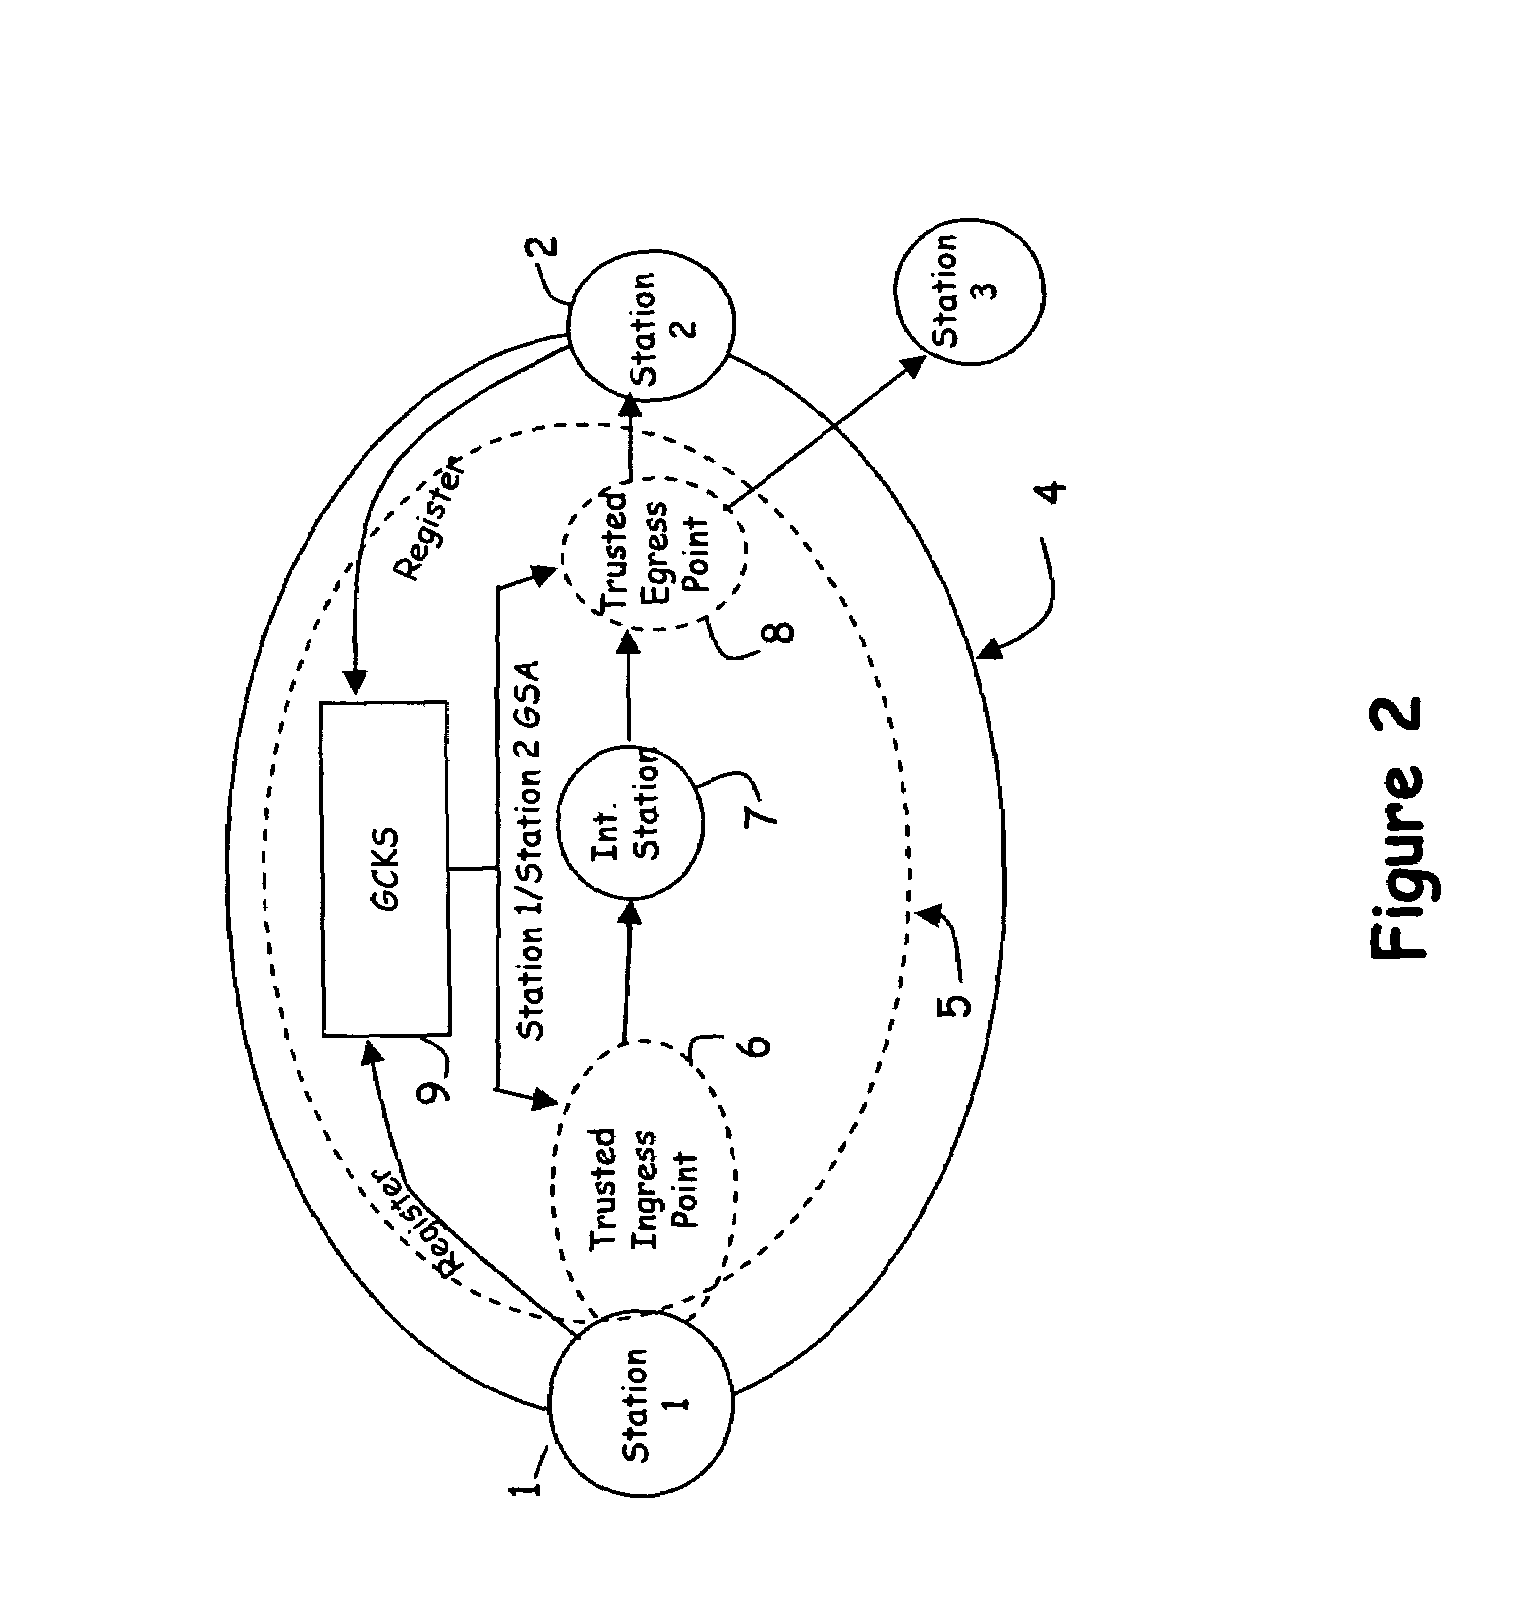 Scalable, distributed method and apparatus for transforming packets to enable secure communication between two stations